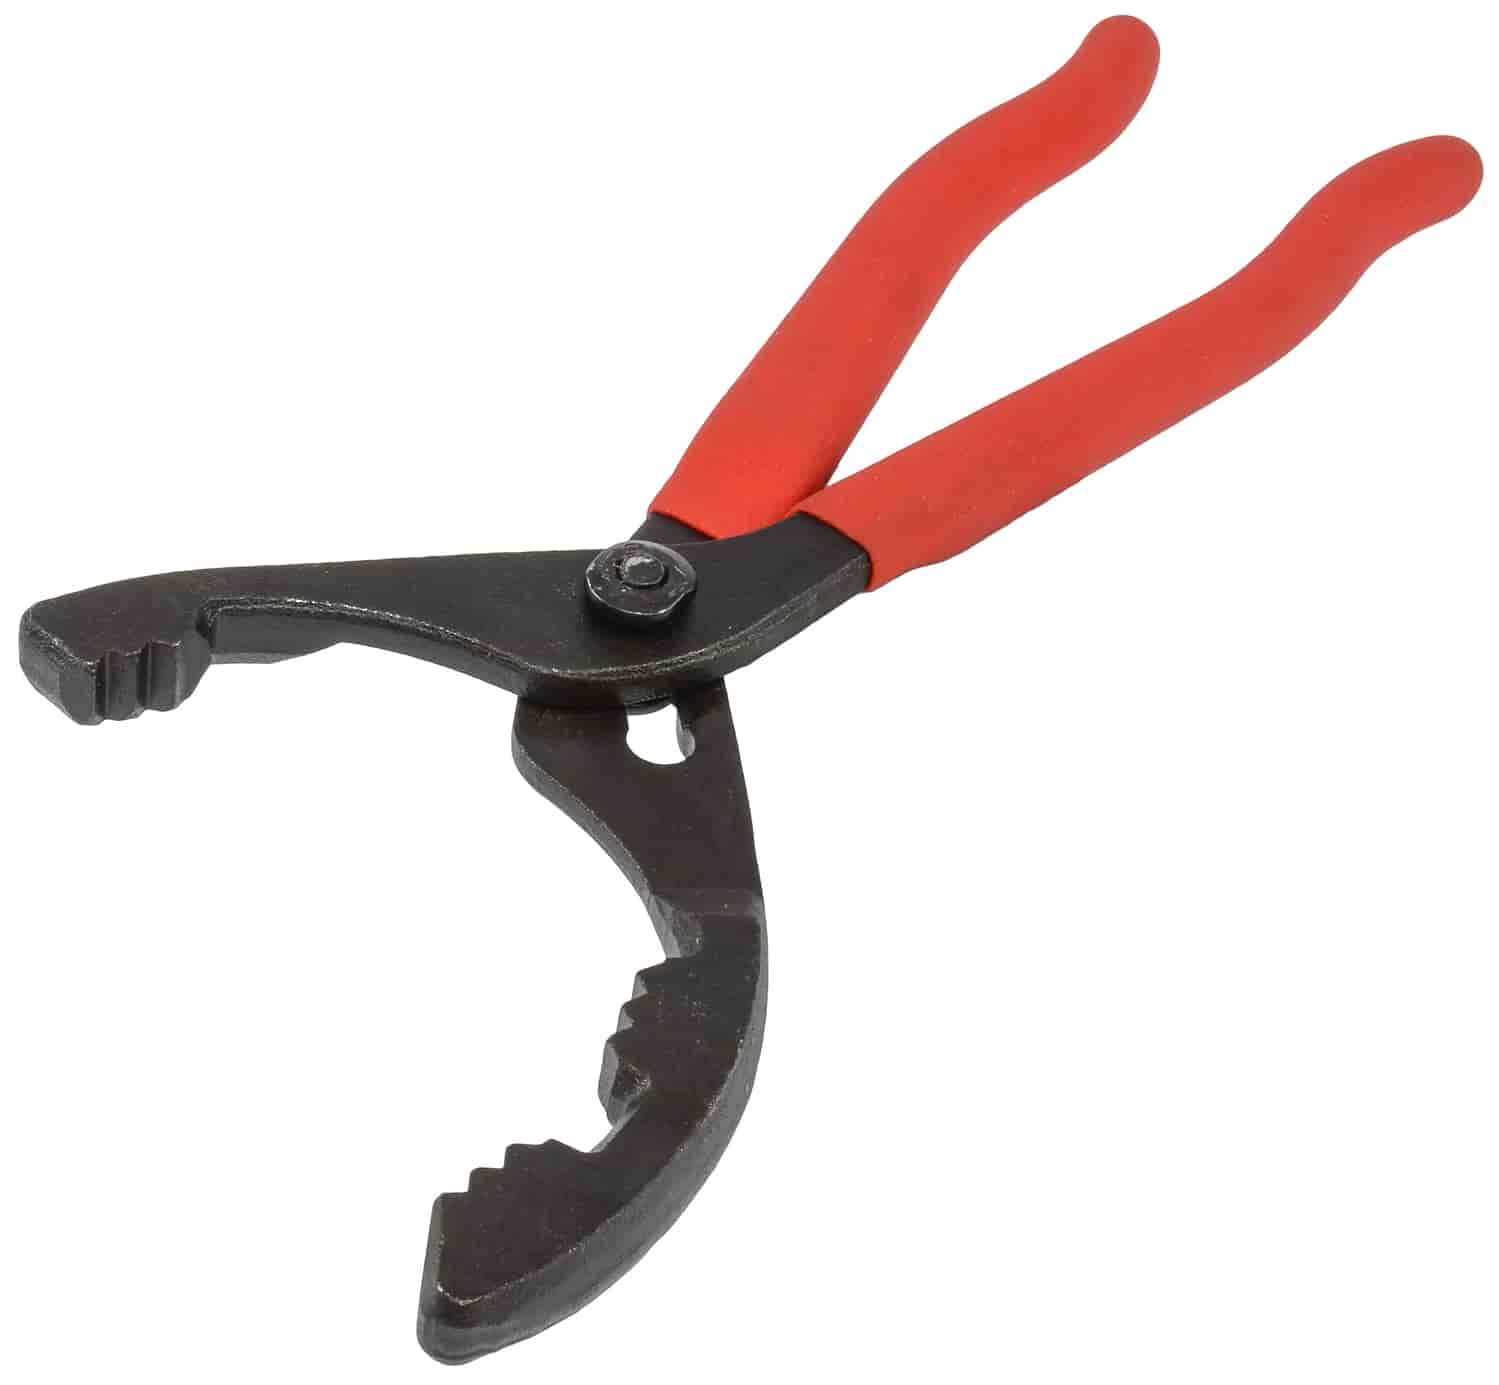 Oil Filter Pliers Range 2-1/4 in. to 3-1/2 in.